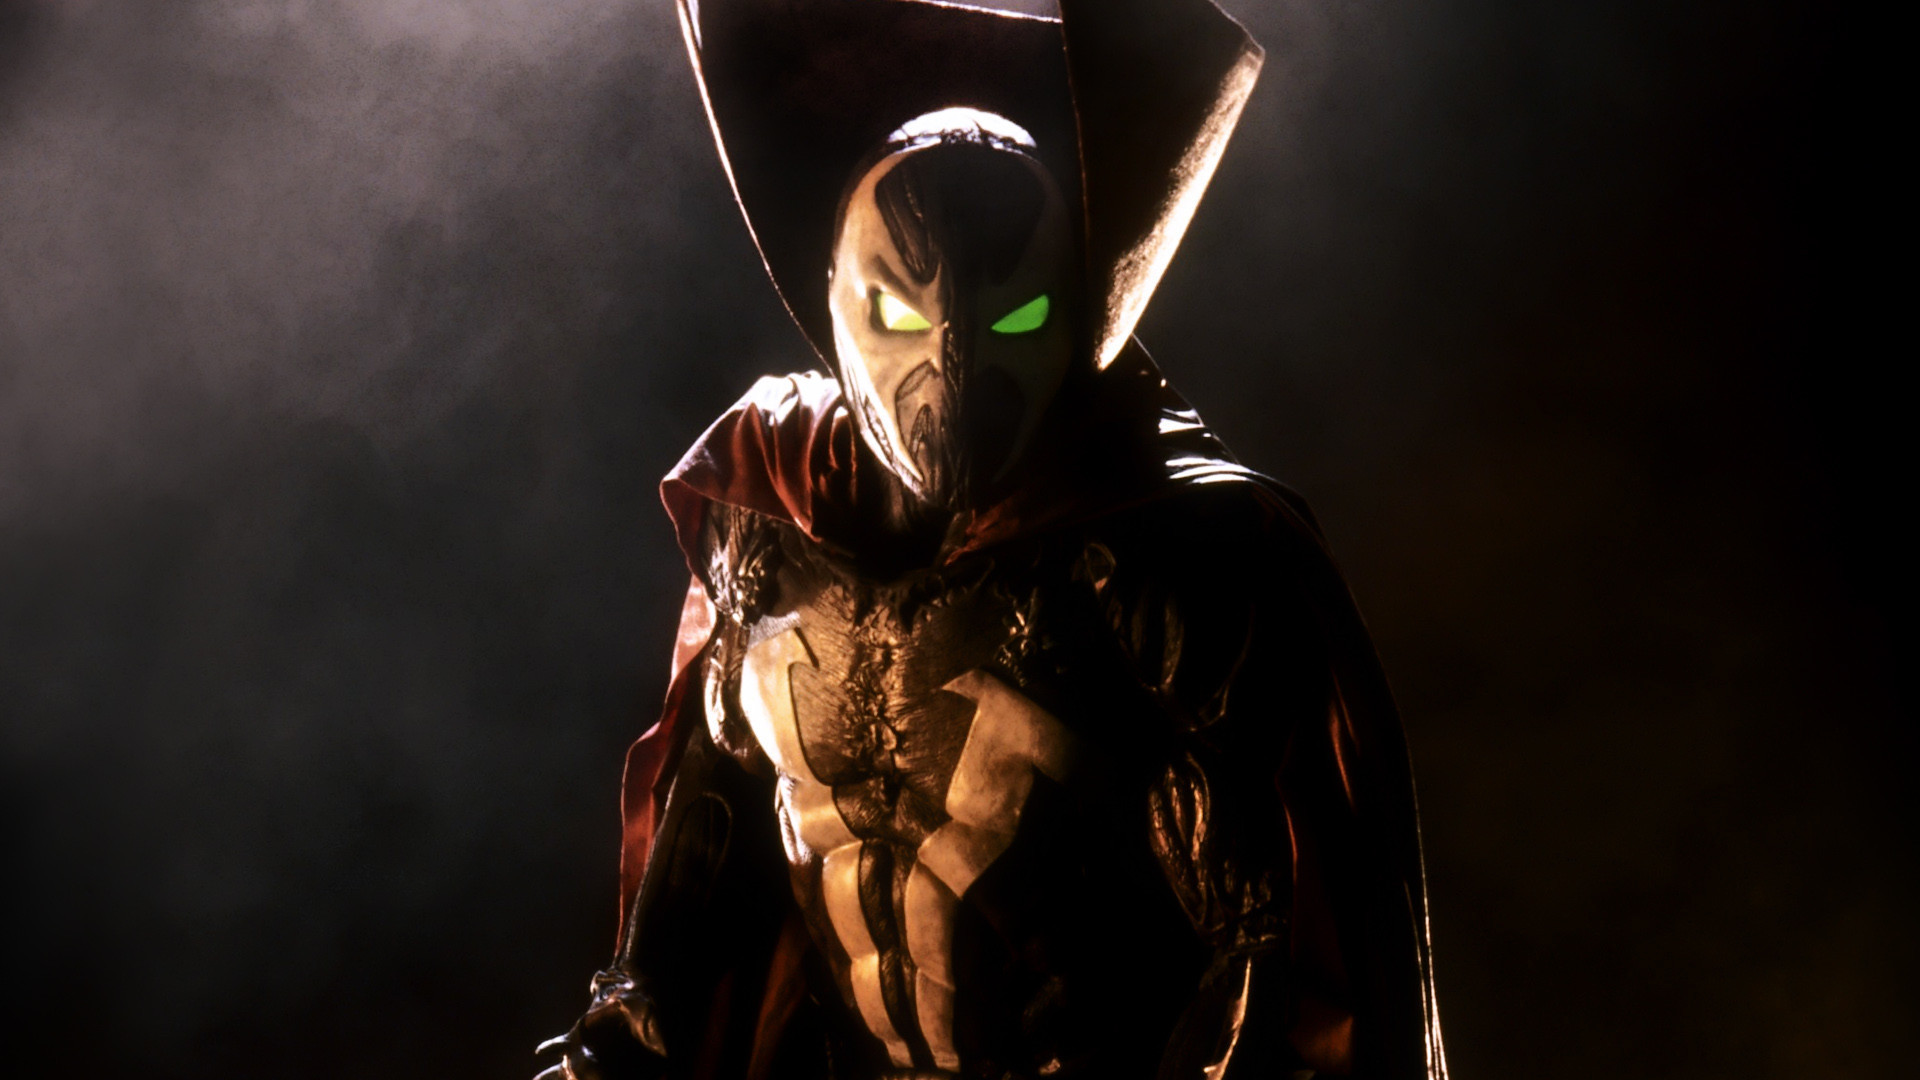 <p>Todd McFarlane’s “Spawn” was all the rage with cool-kid comic book consumers in the 1990s, and, given the number of issues sold over that period, hardly qualifies as forgettable. The film, however, is best left to the scrap heap of failed adaptations, even if it actually performed solidly at the box office. Unfortunately, fans and critics alike hated it; the script is dopey, the direction amateurish and the CG effects primitive.</p><p><a href='https://www.msn.com/en-us/community/channel/vid-cj9pqbr0vn9in2b6ddcd8sfgpfq6x6utp44fssrv6mc2gtybw0us'>Follow us on MSN to see more of our exclusive entertainment content.</a></p>